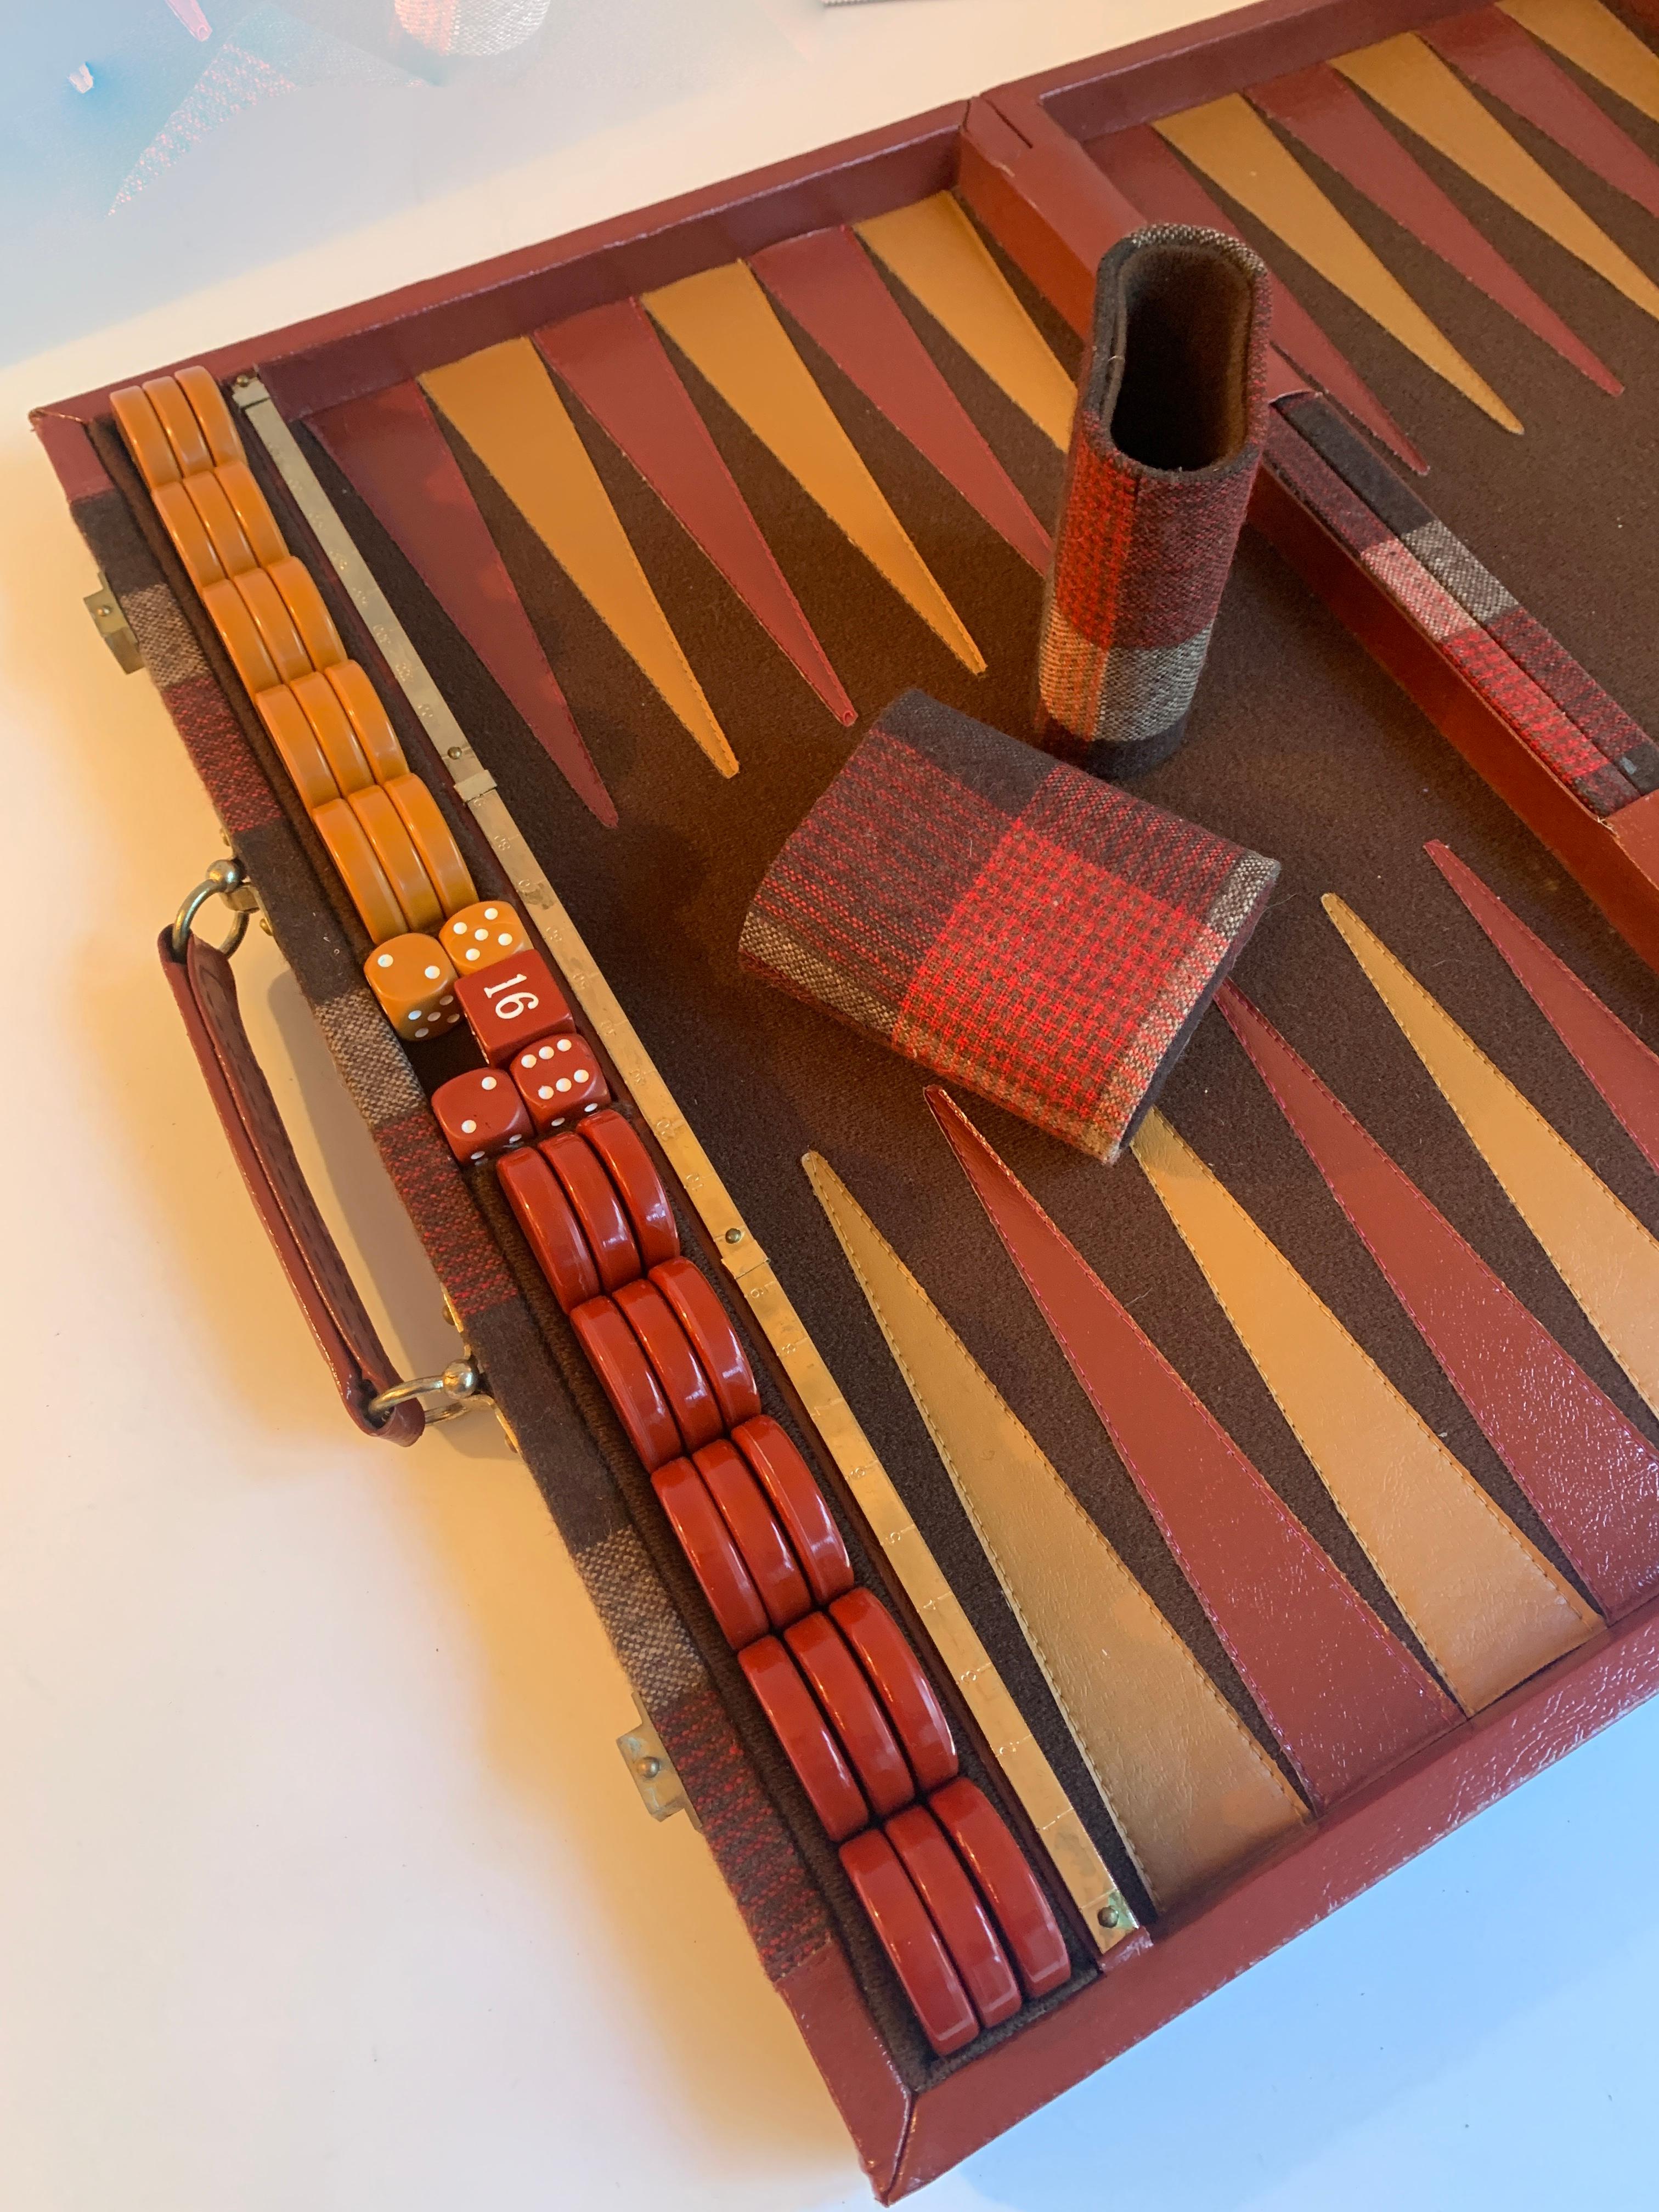 A wonderful travel set of Backgammon - Wool plaid exterior with bakelite game pieces and detailed brass slide for score keeping. A decorative companion to the game room or for the games person on the go!